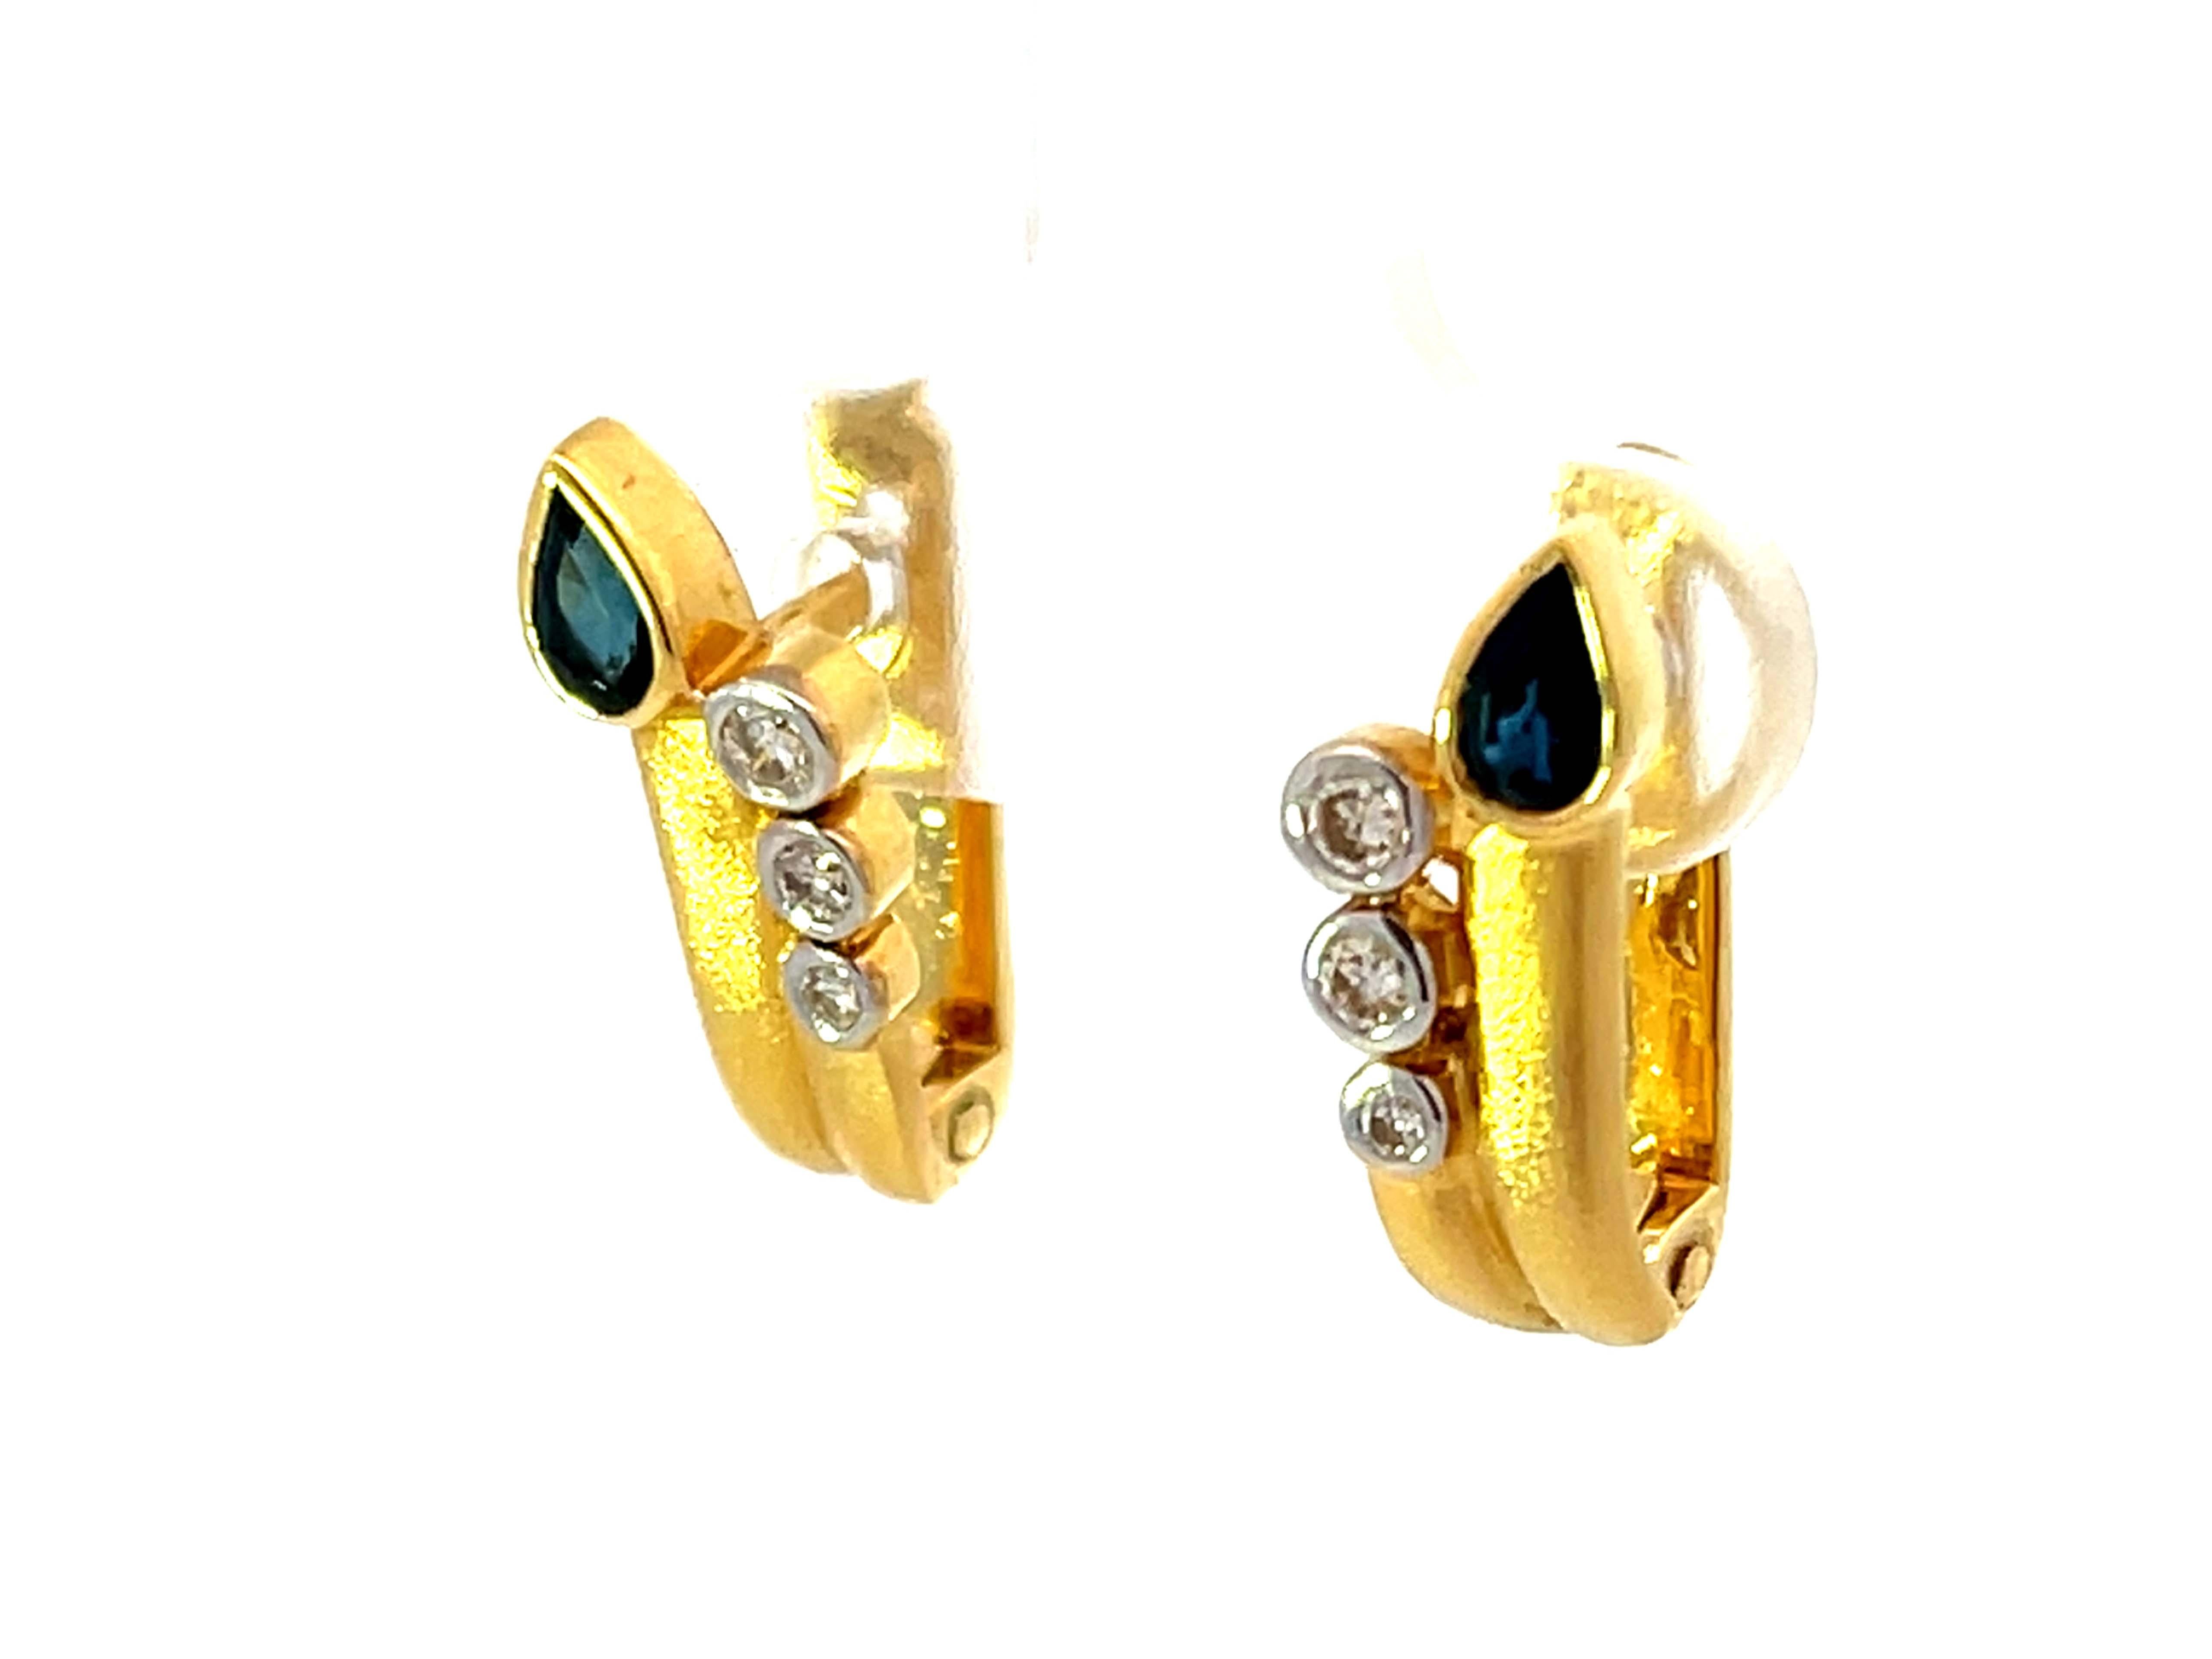 Brilliant Cut Satin Finish Sapphire and Diamond Earrings 18K Yellow Gold For Sale